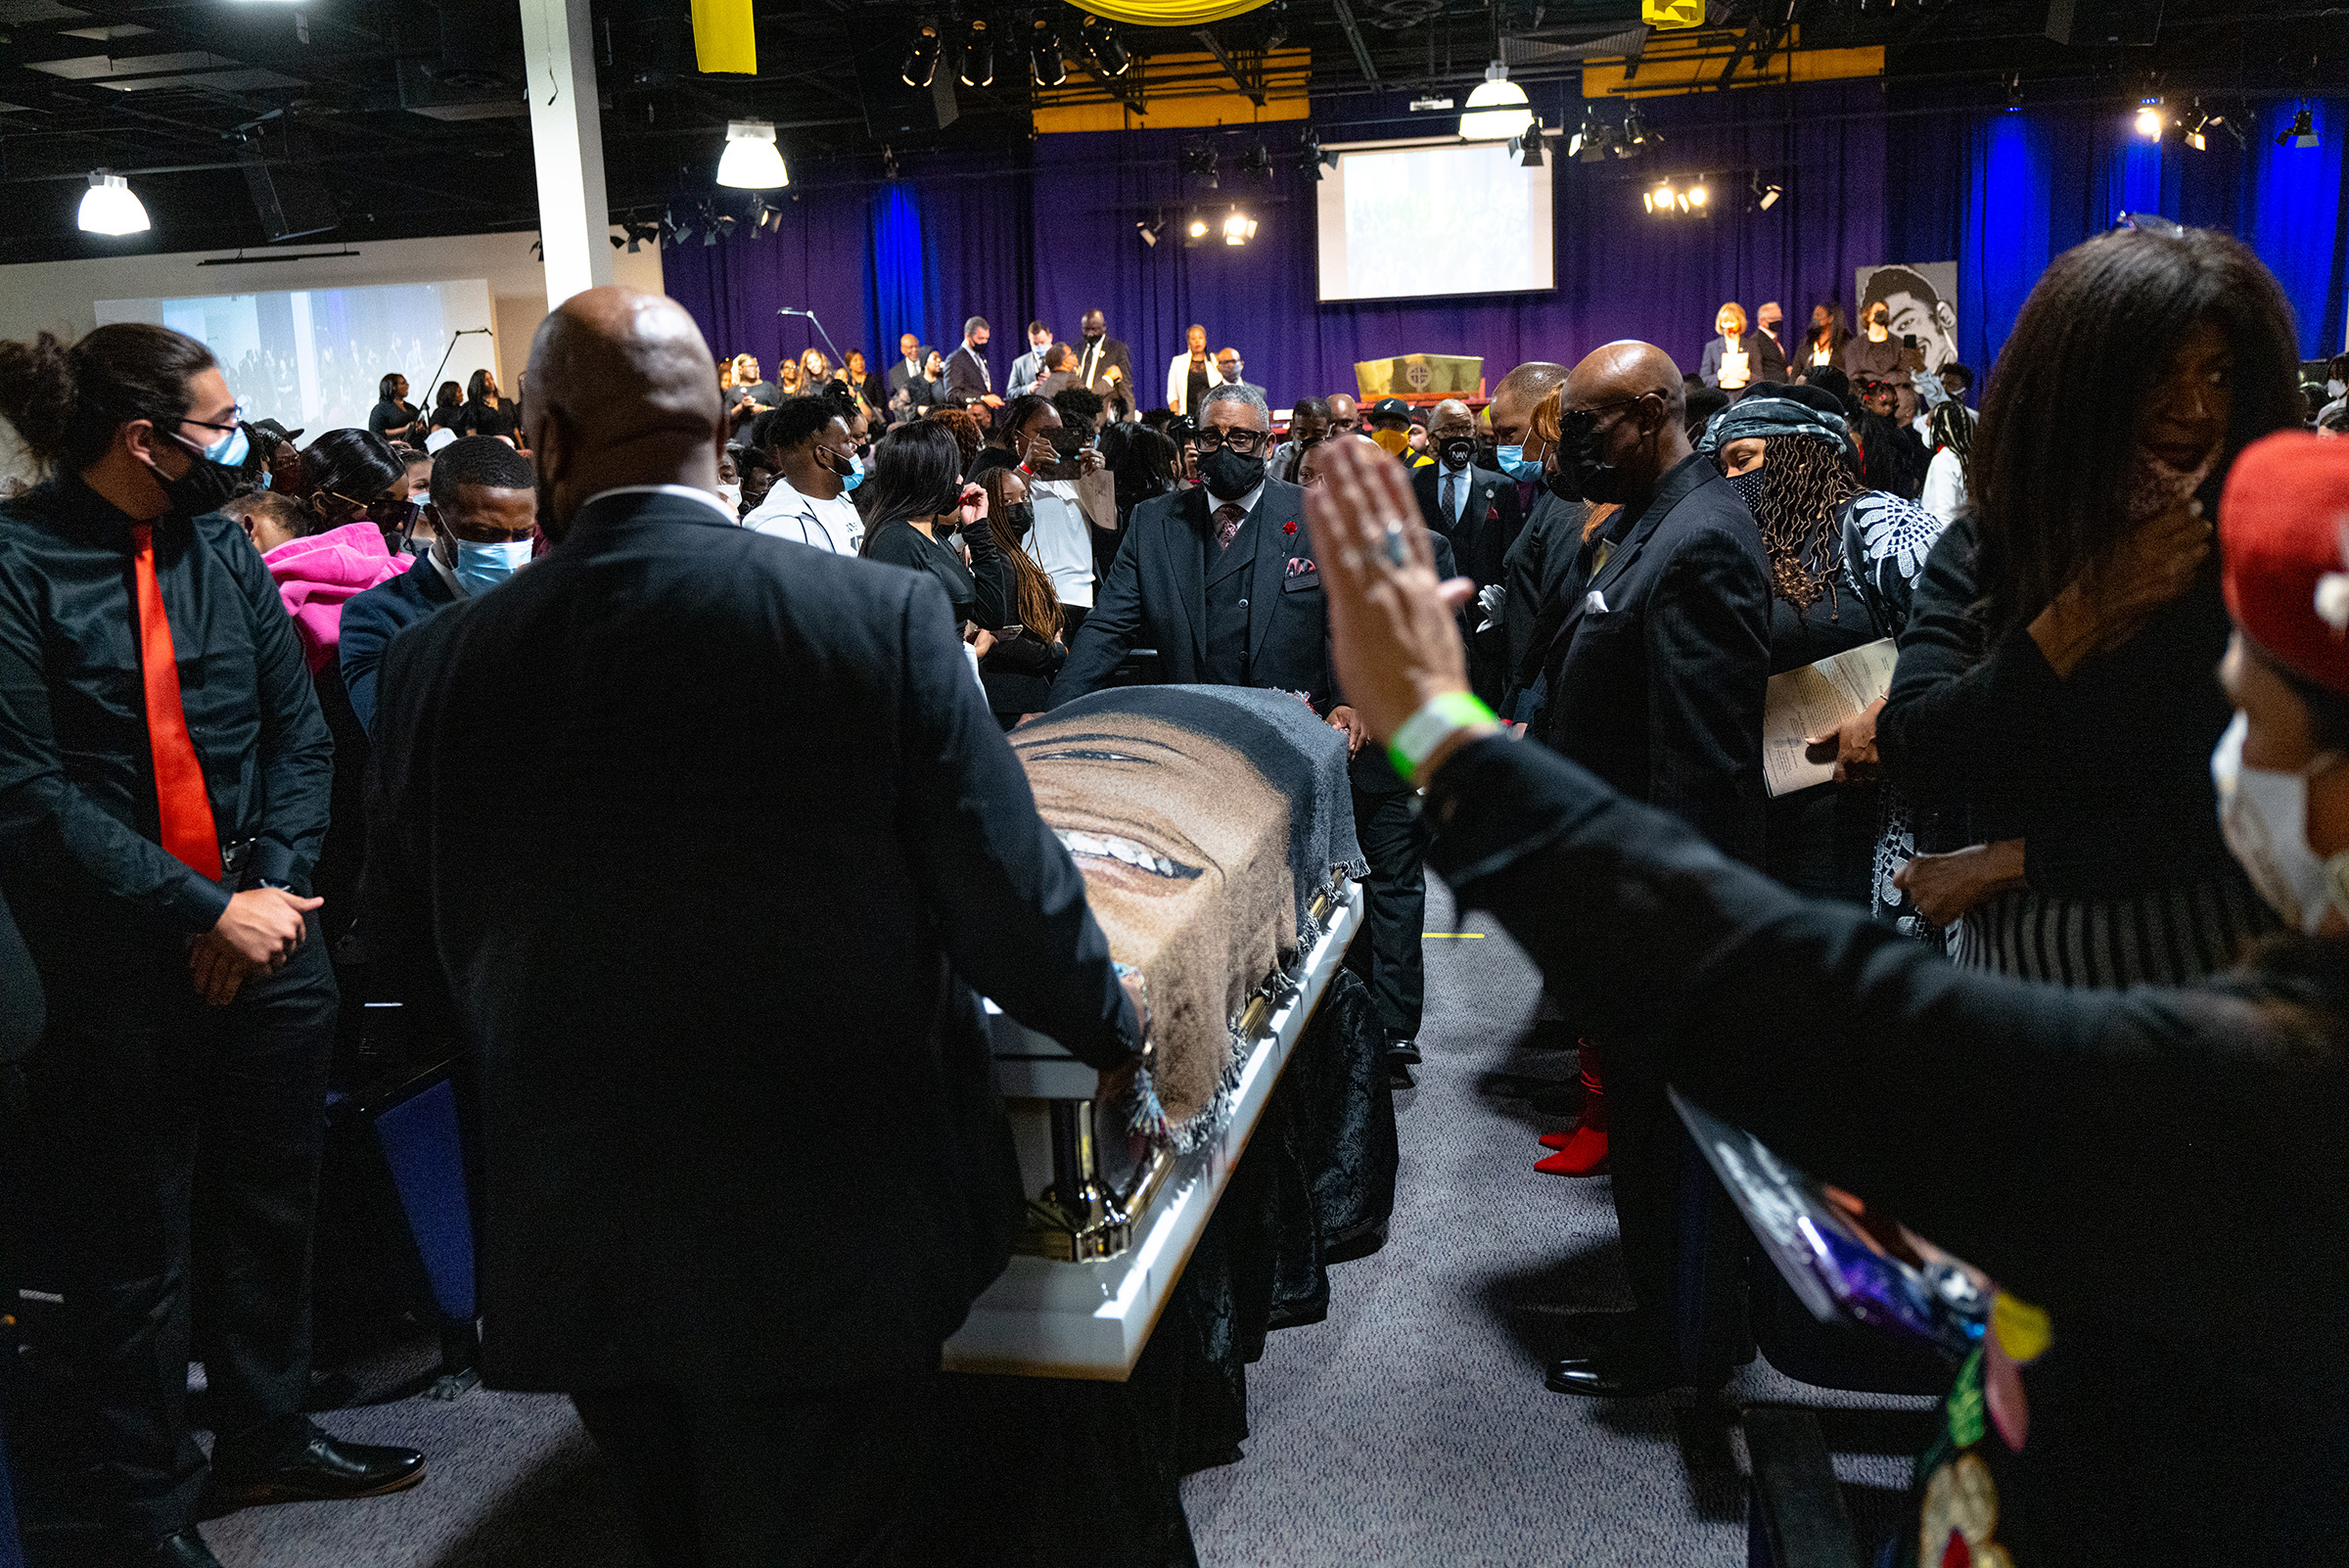 The casket of Daunte Wright was taken from the church after his funeral as his family walked behind it at Shiloh Temple International Ministries in Minneapolis on April 22. (Ruddy Roye for TIME)